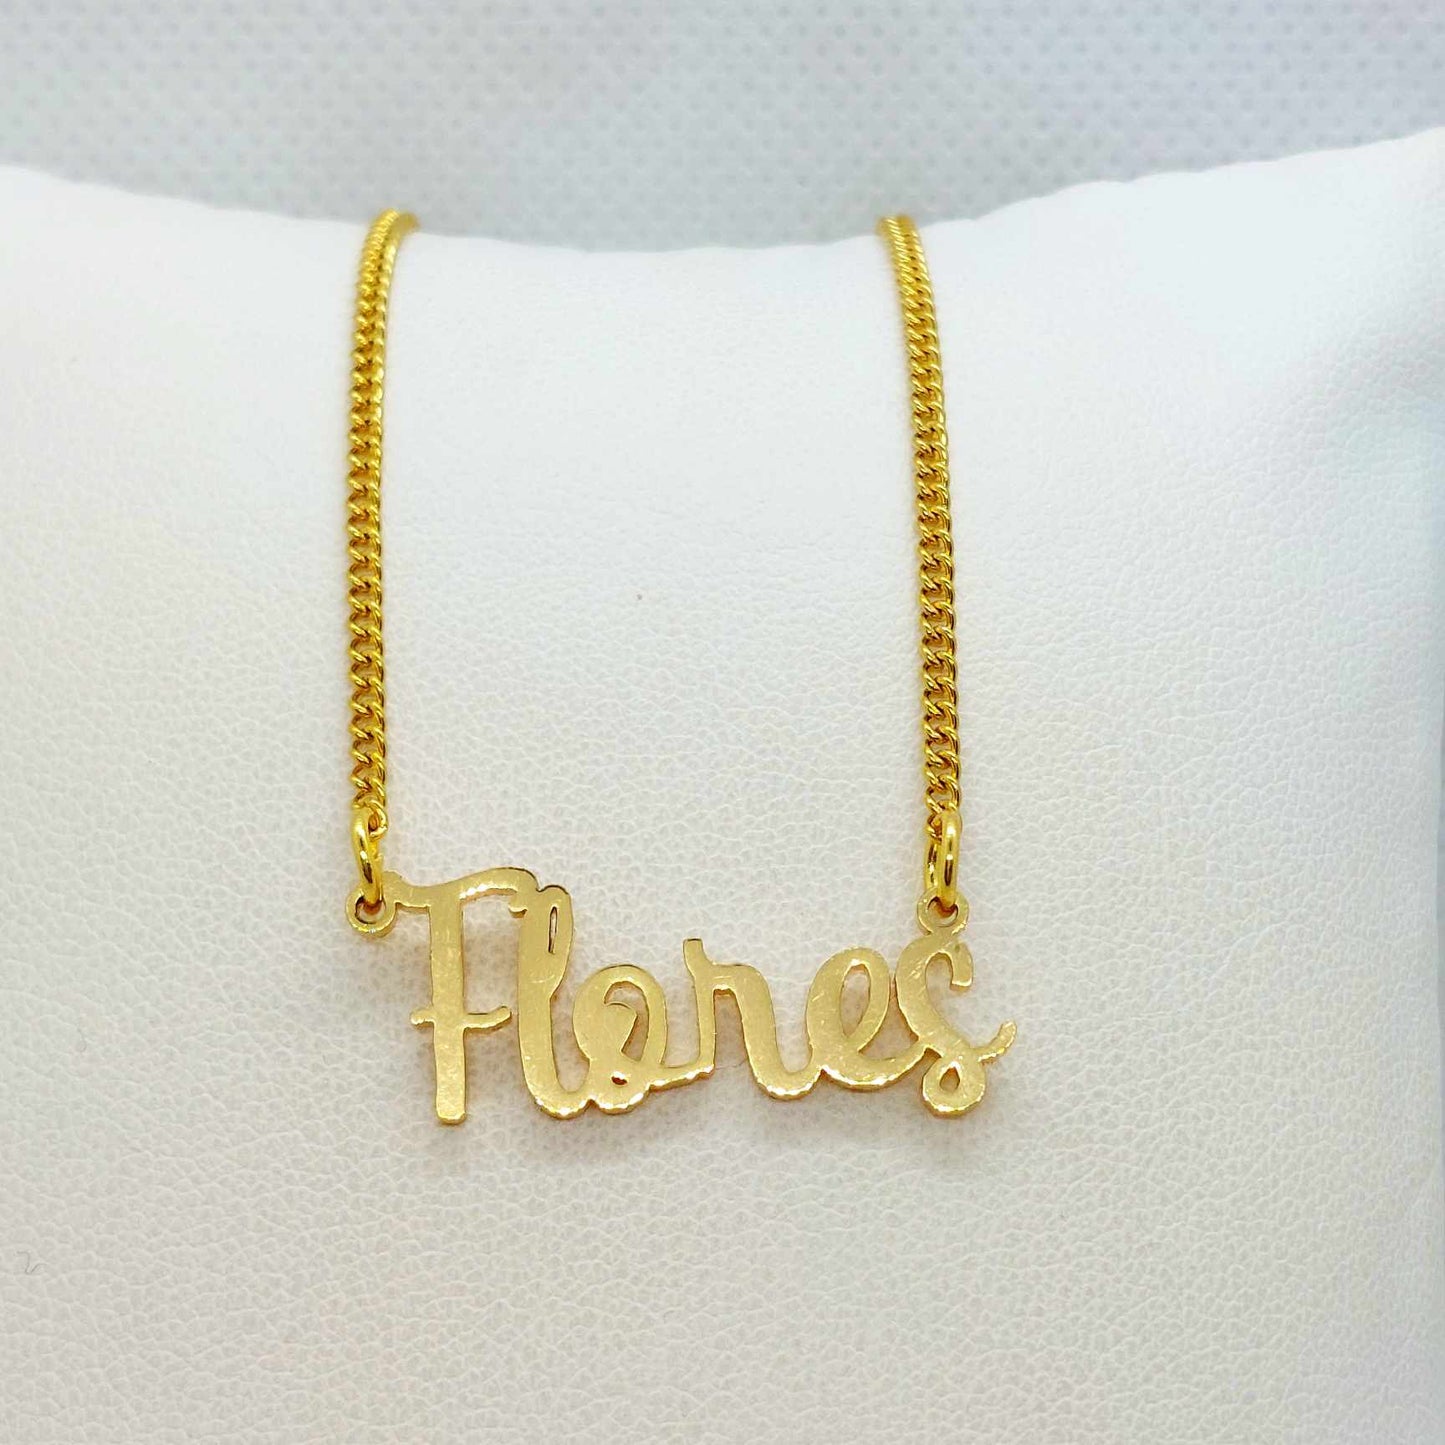 Customizeable Name Pendant In Stainless Steel with Gold Plated Chain Necklace